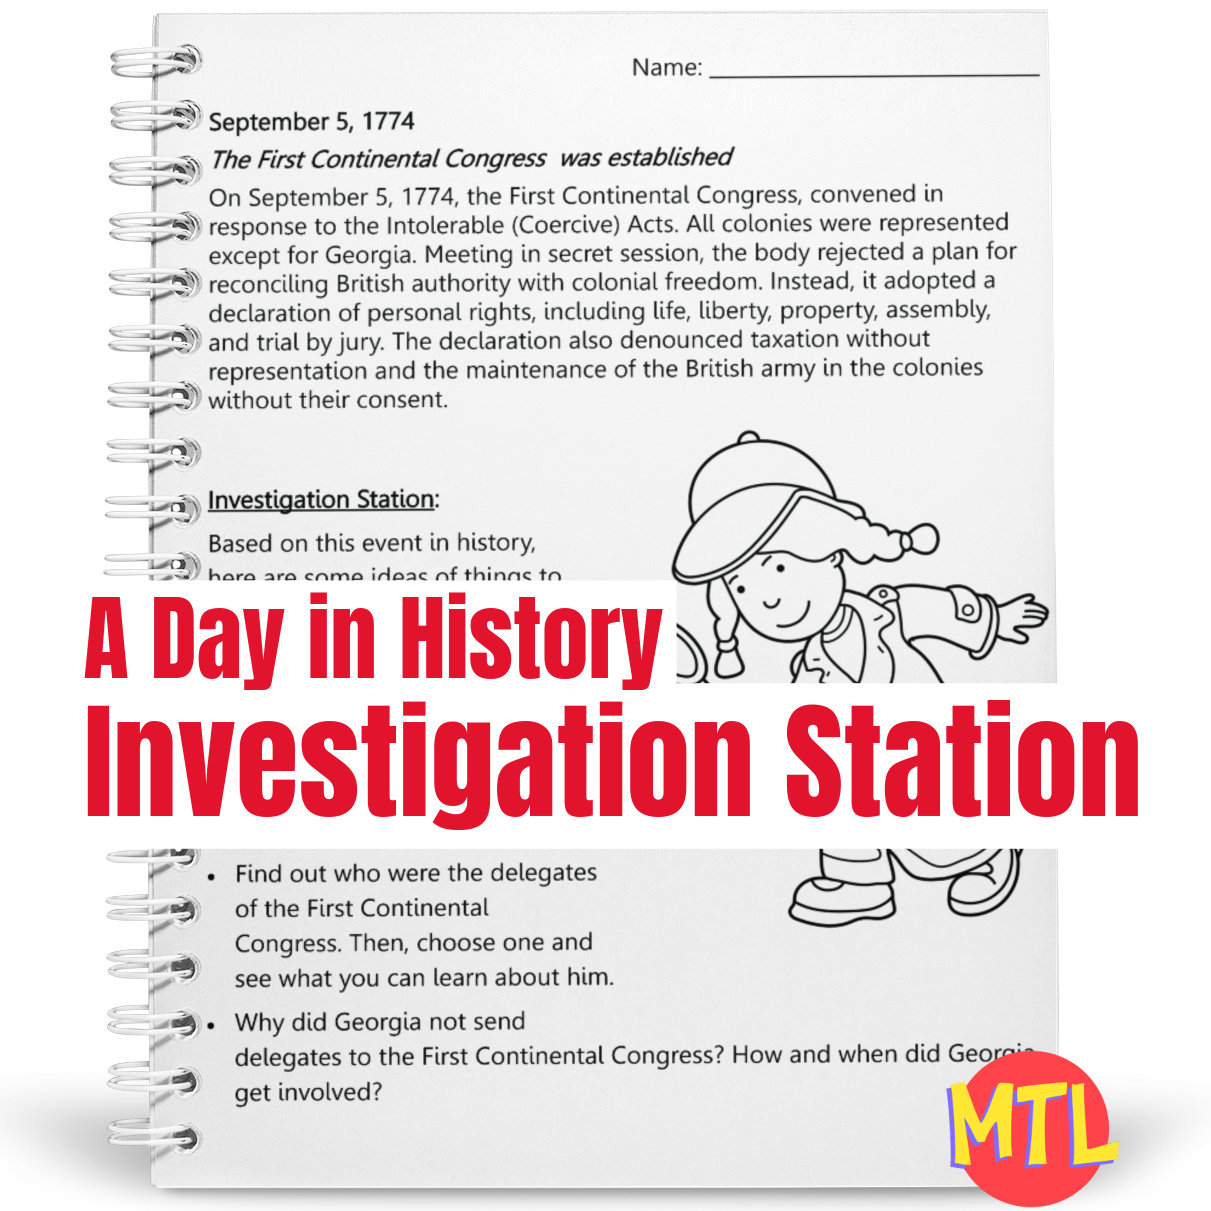 A Day in History - Investigation Station is a series of fun sleuthing research activities based on a single event on a specific day in history! This resource centers around the convening of the First Continental Congress. Investigation ideas include the study of the Intolerable Acts, the delegates that attended and finding out why Georgia did not send a delegate.